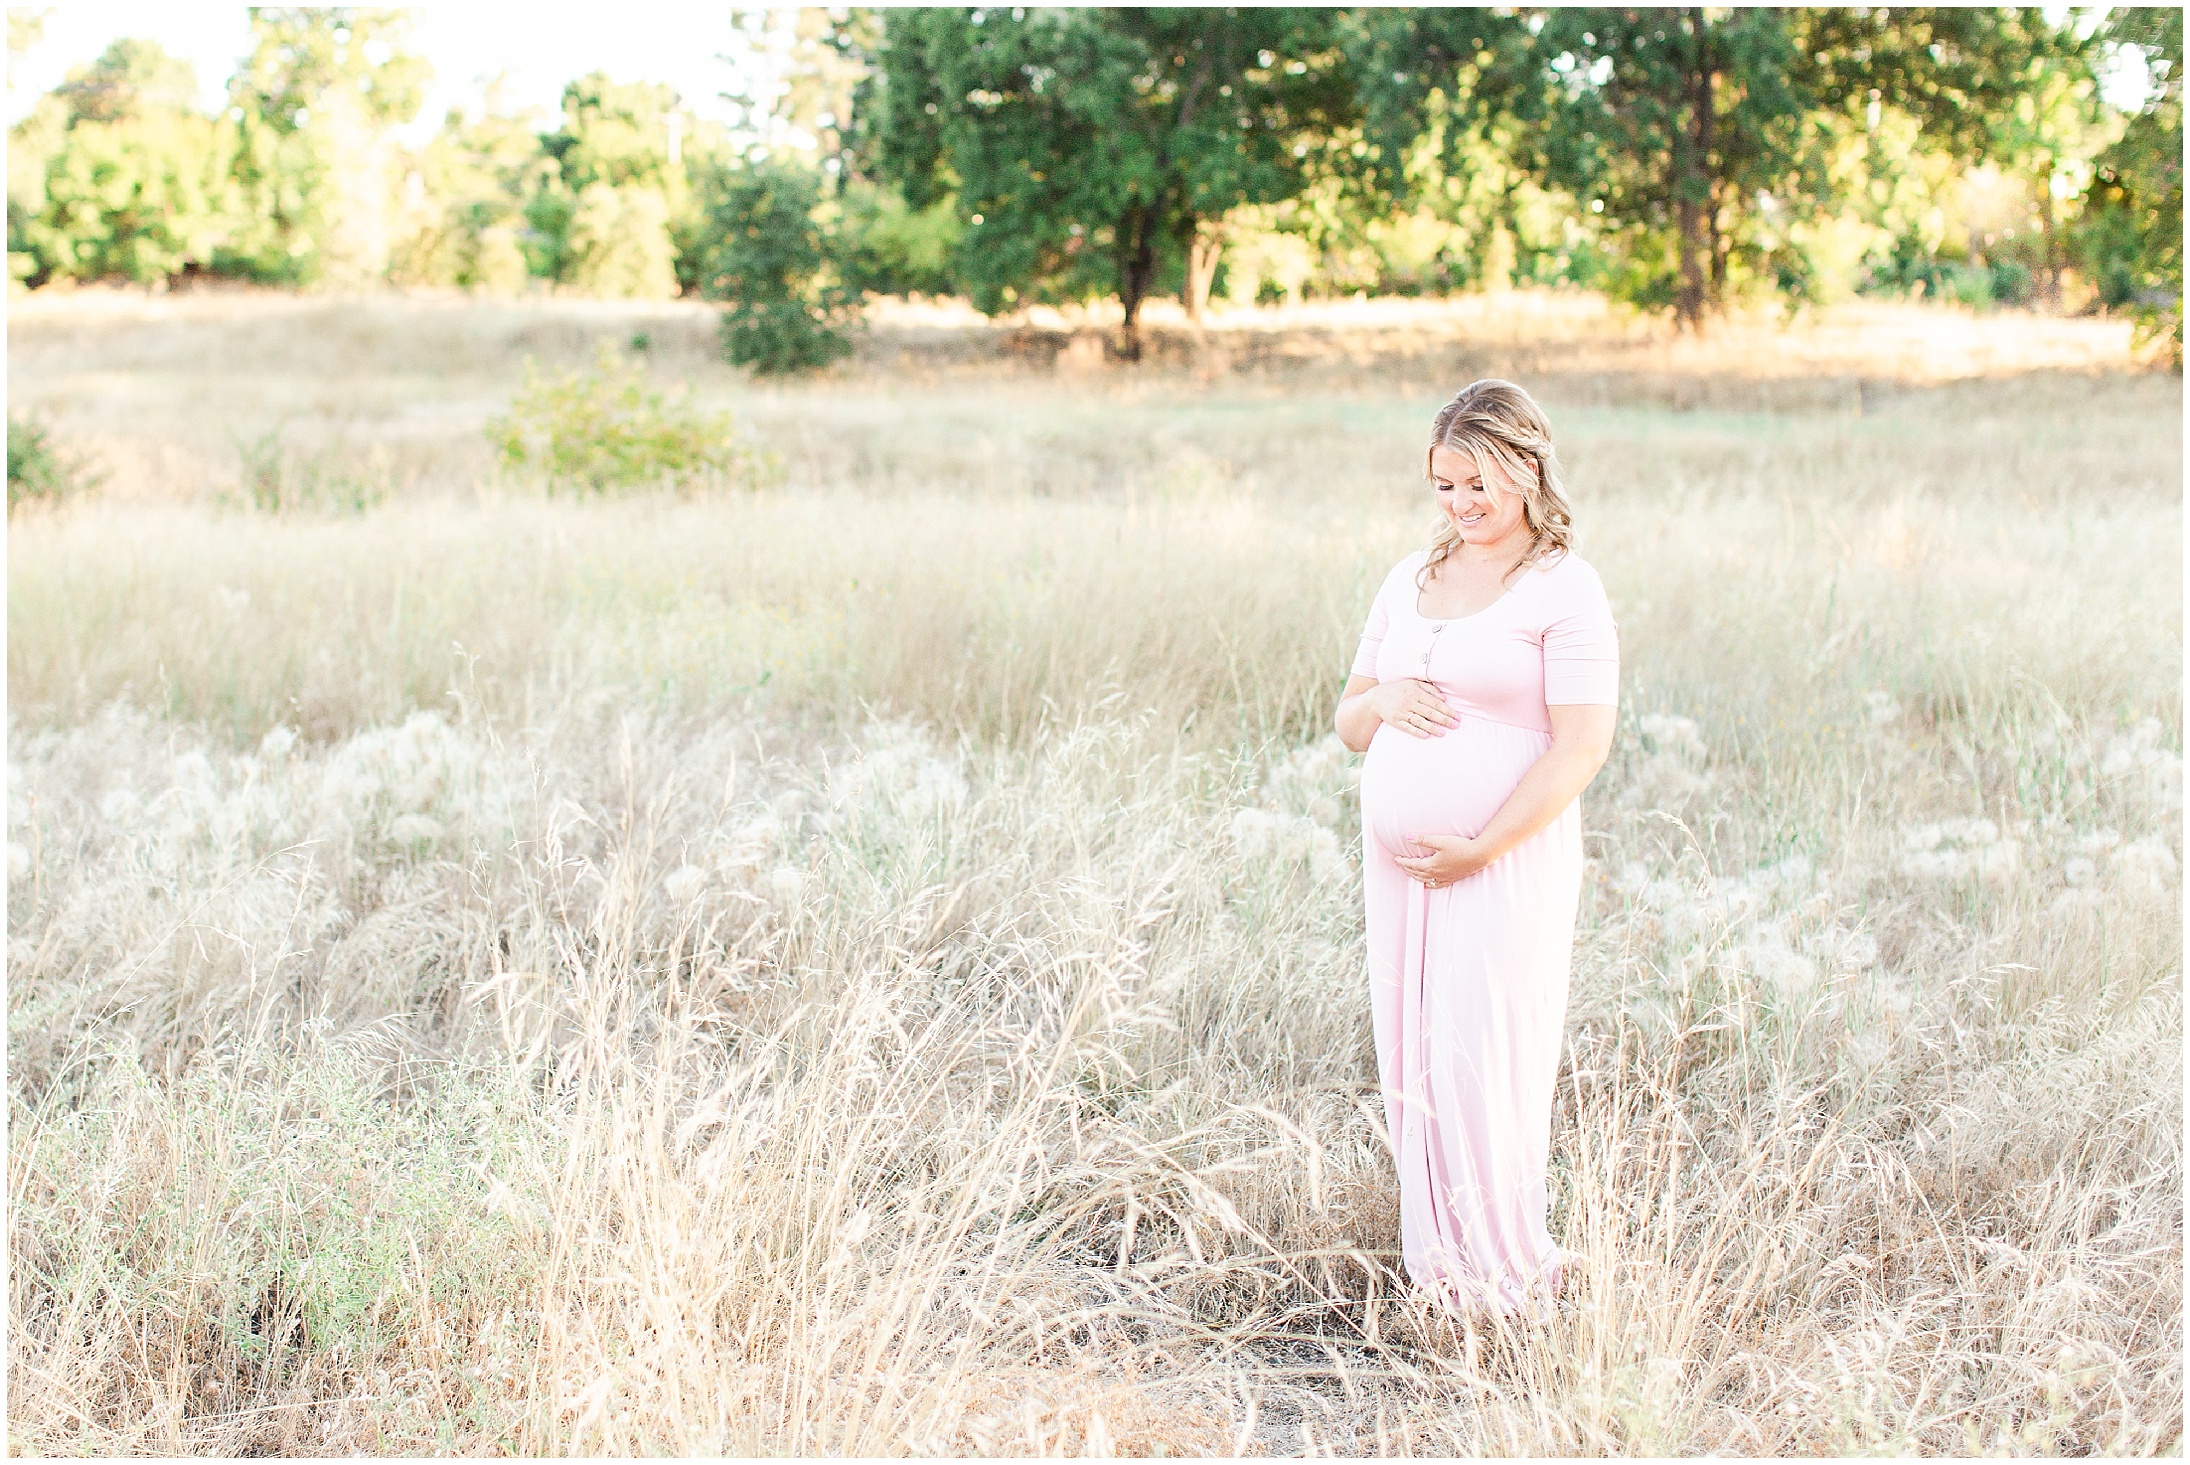 Romantic Sunset Maternity Session in Tall Grass,